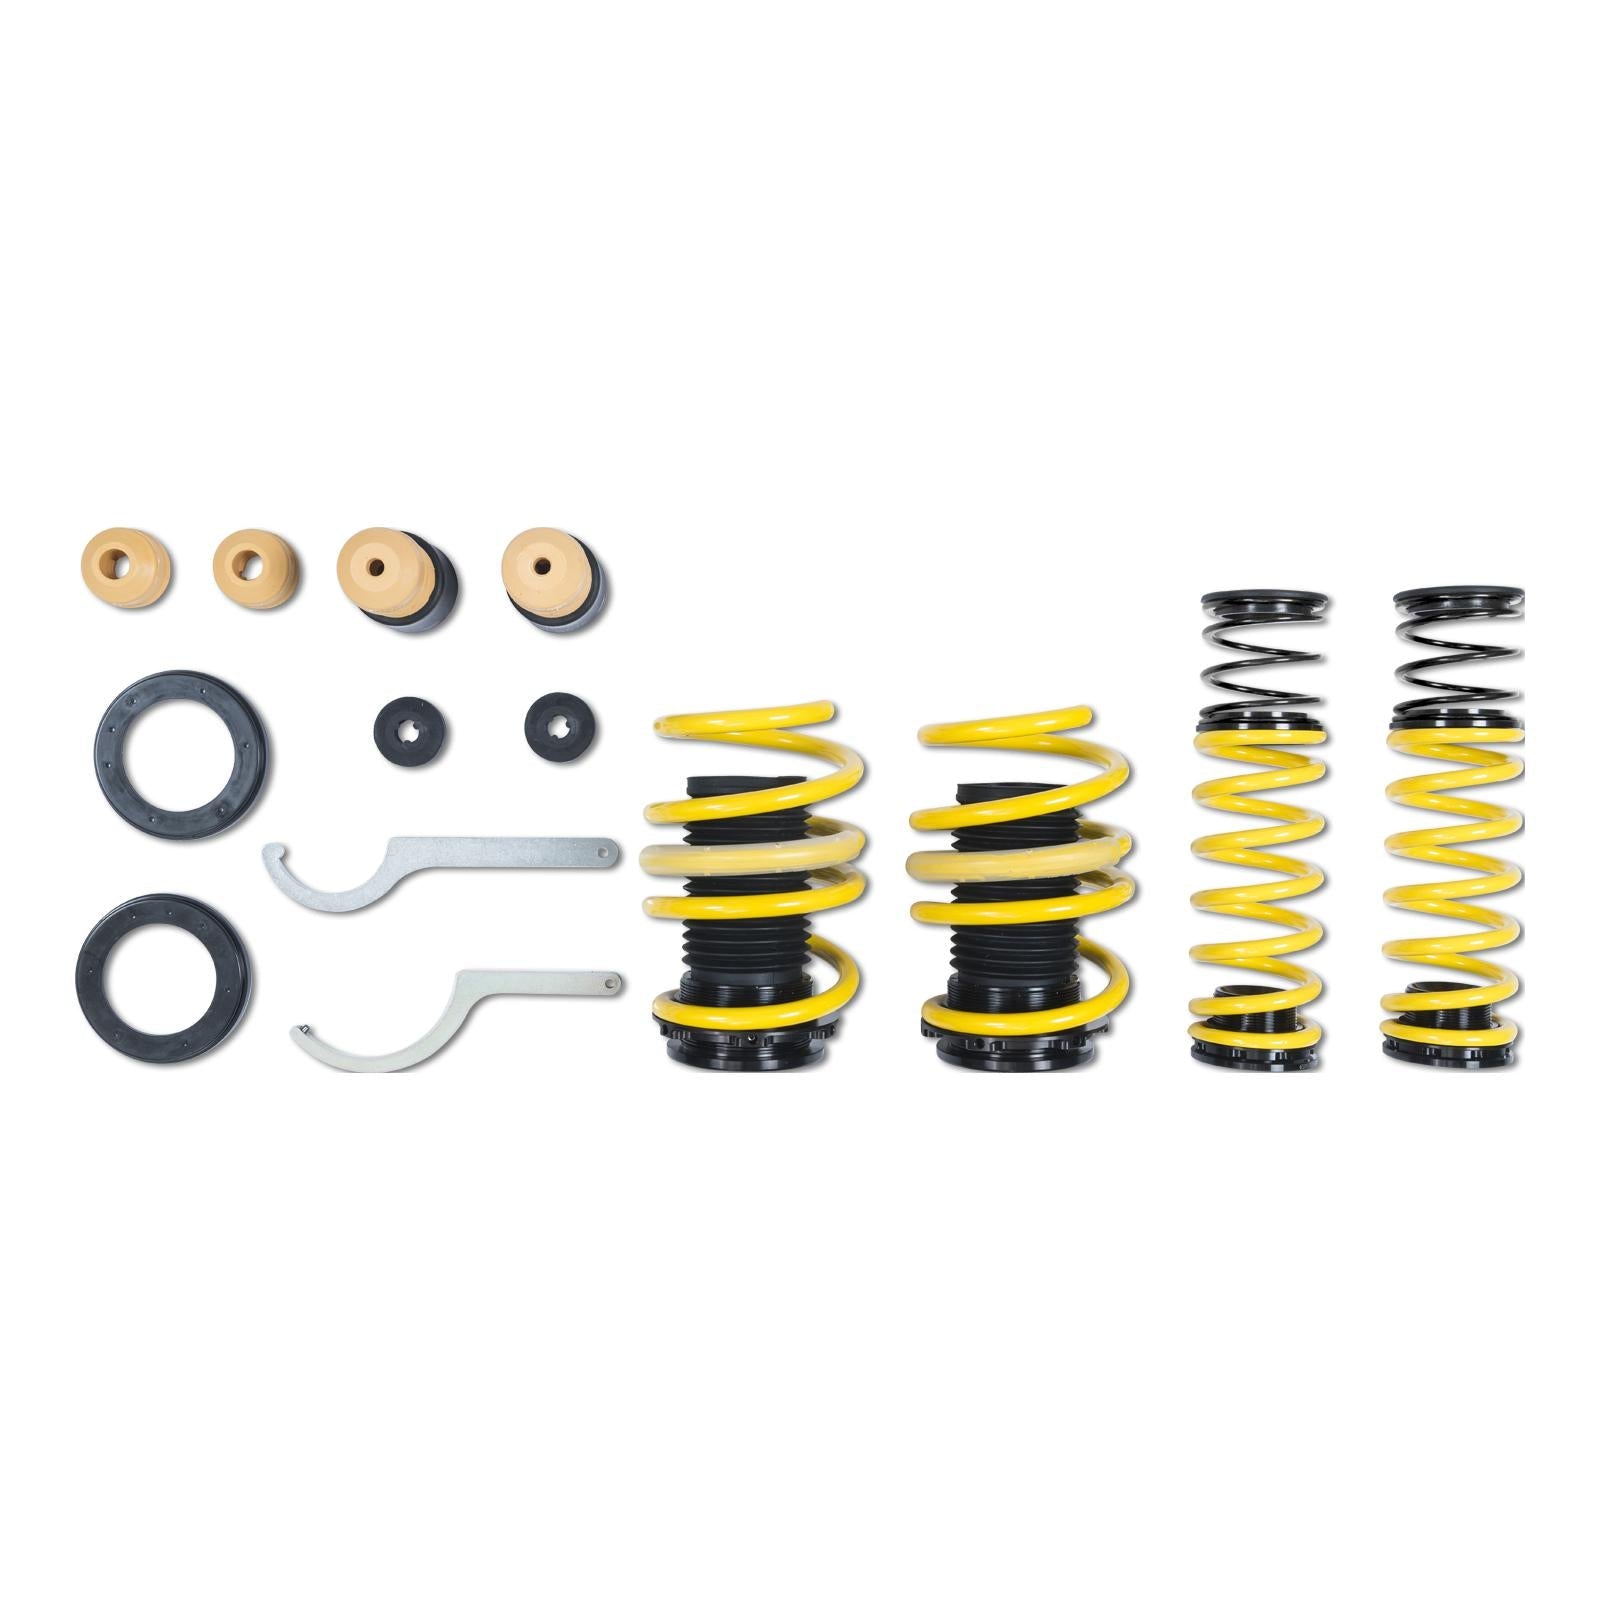 ST Suspensions Adjustable Lowering Springs - BMW E93 M3